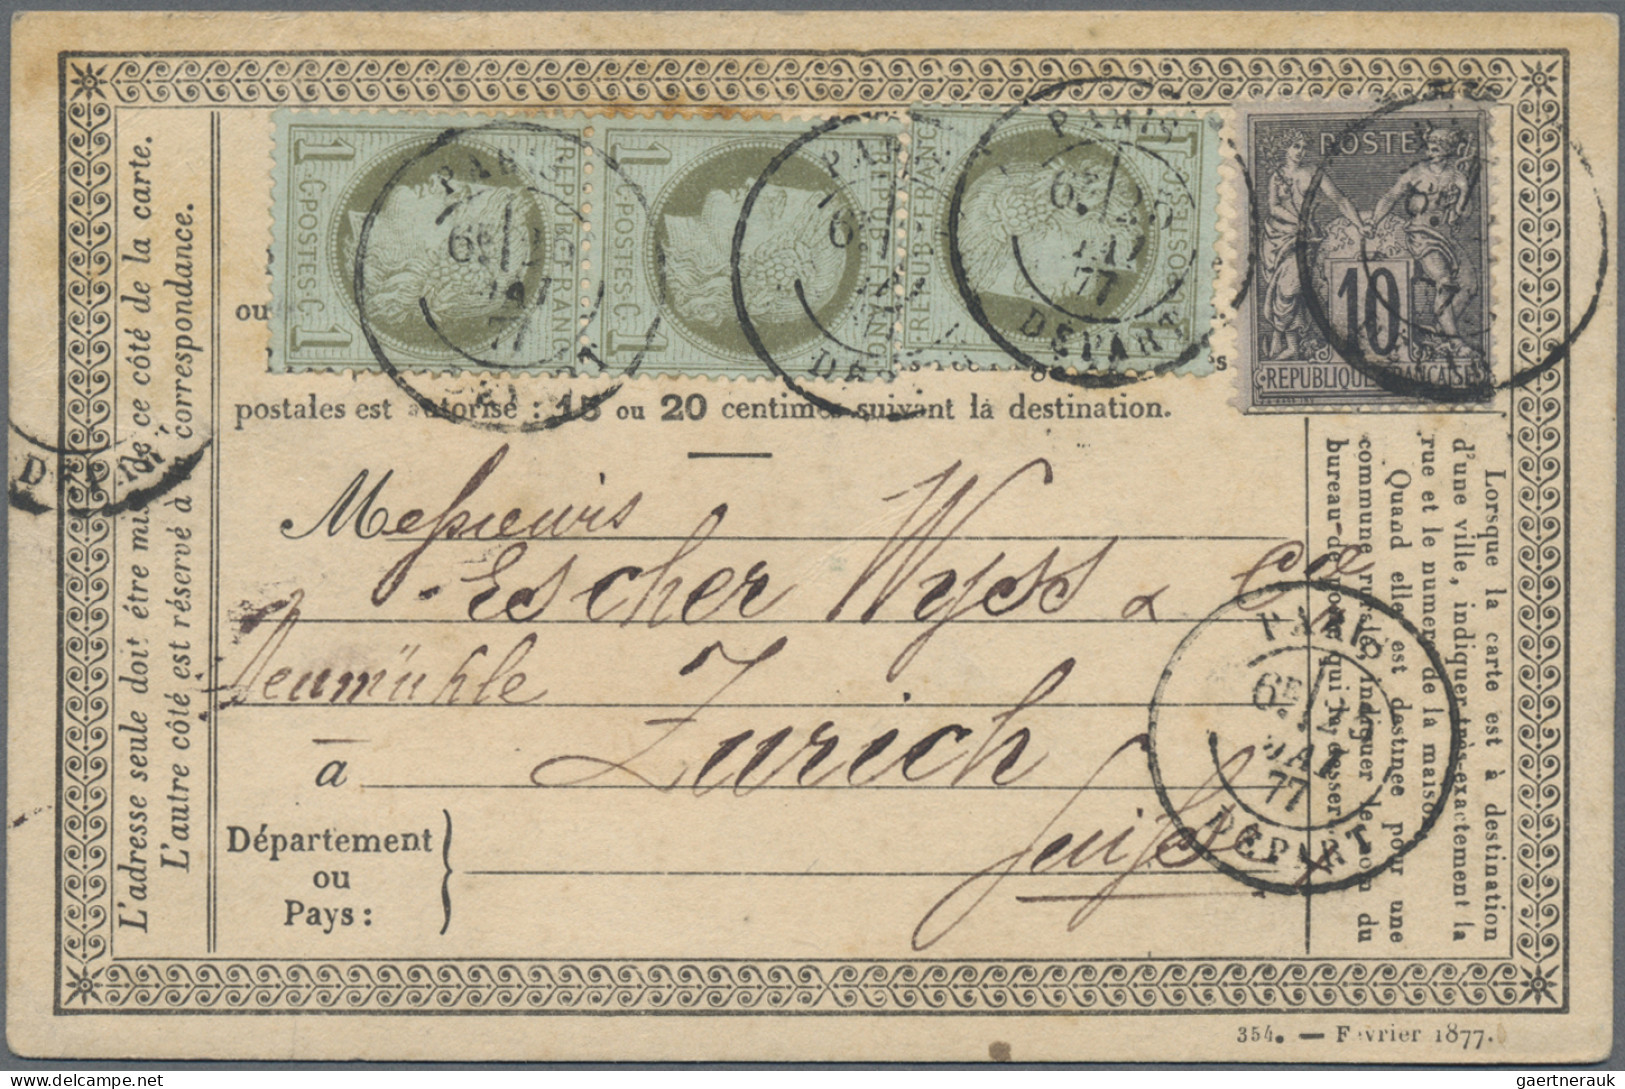 France: 1850/2000 (ca.), France+Monaco, balance of aprpx. 650 entires with speci